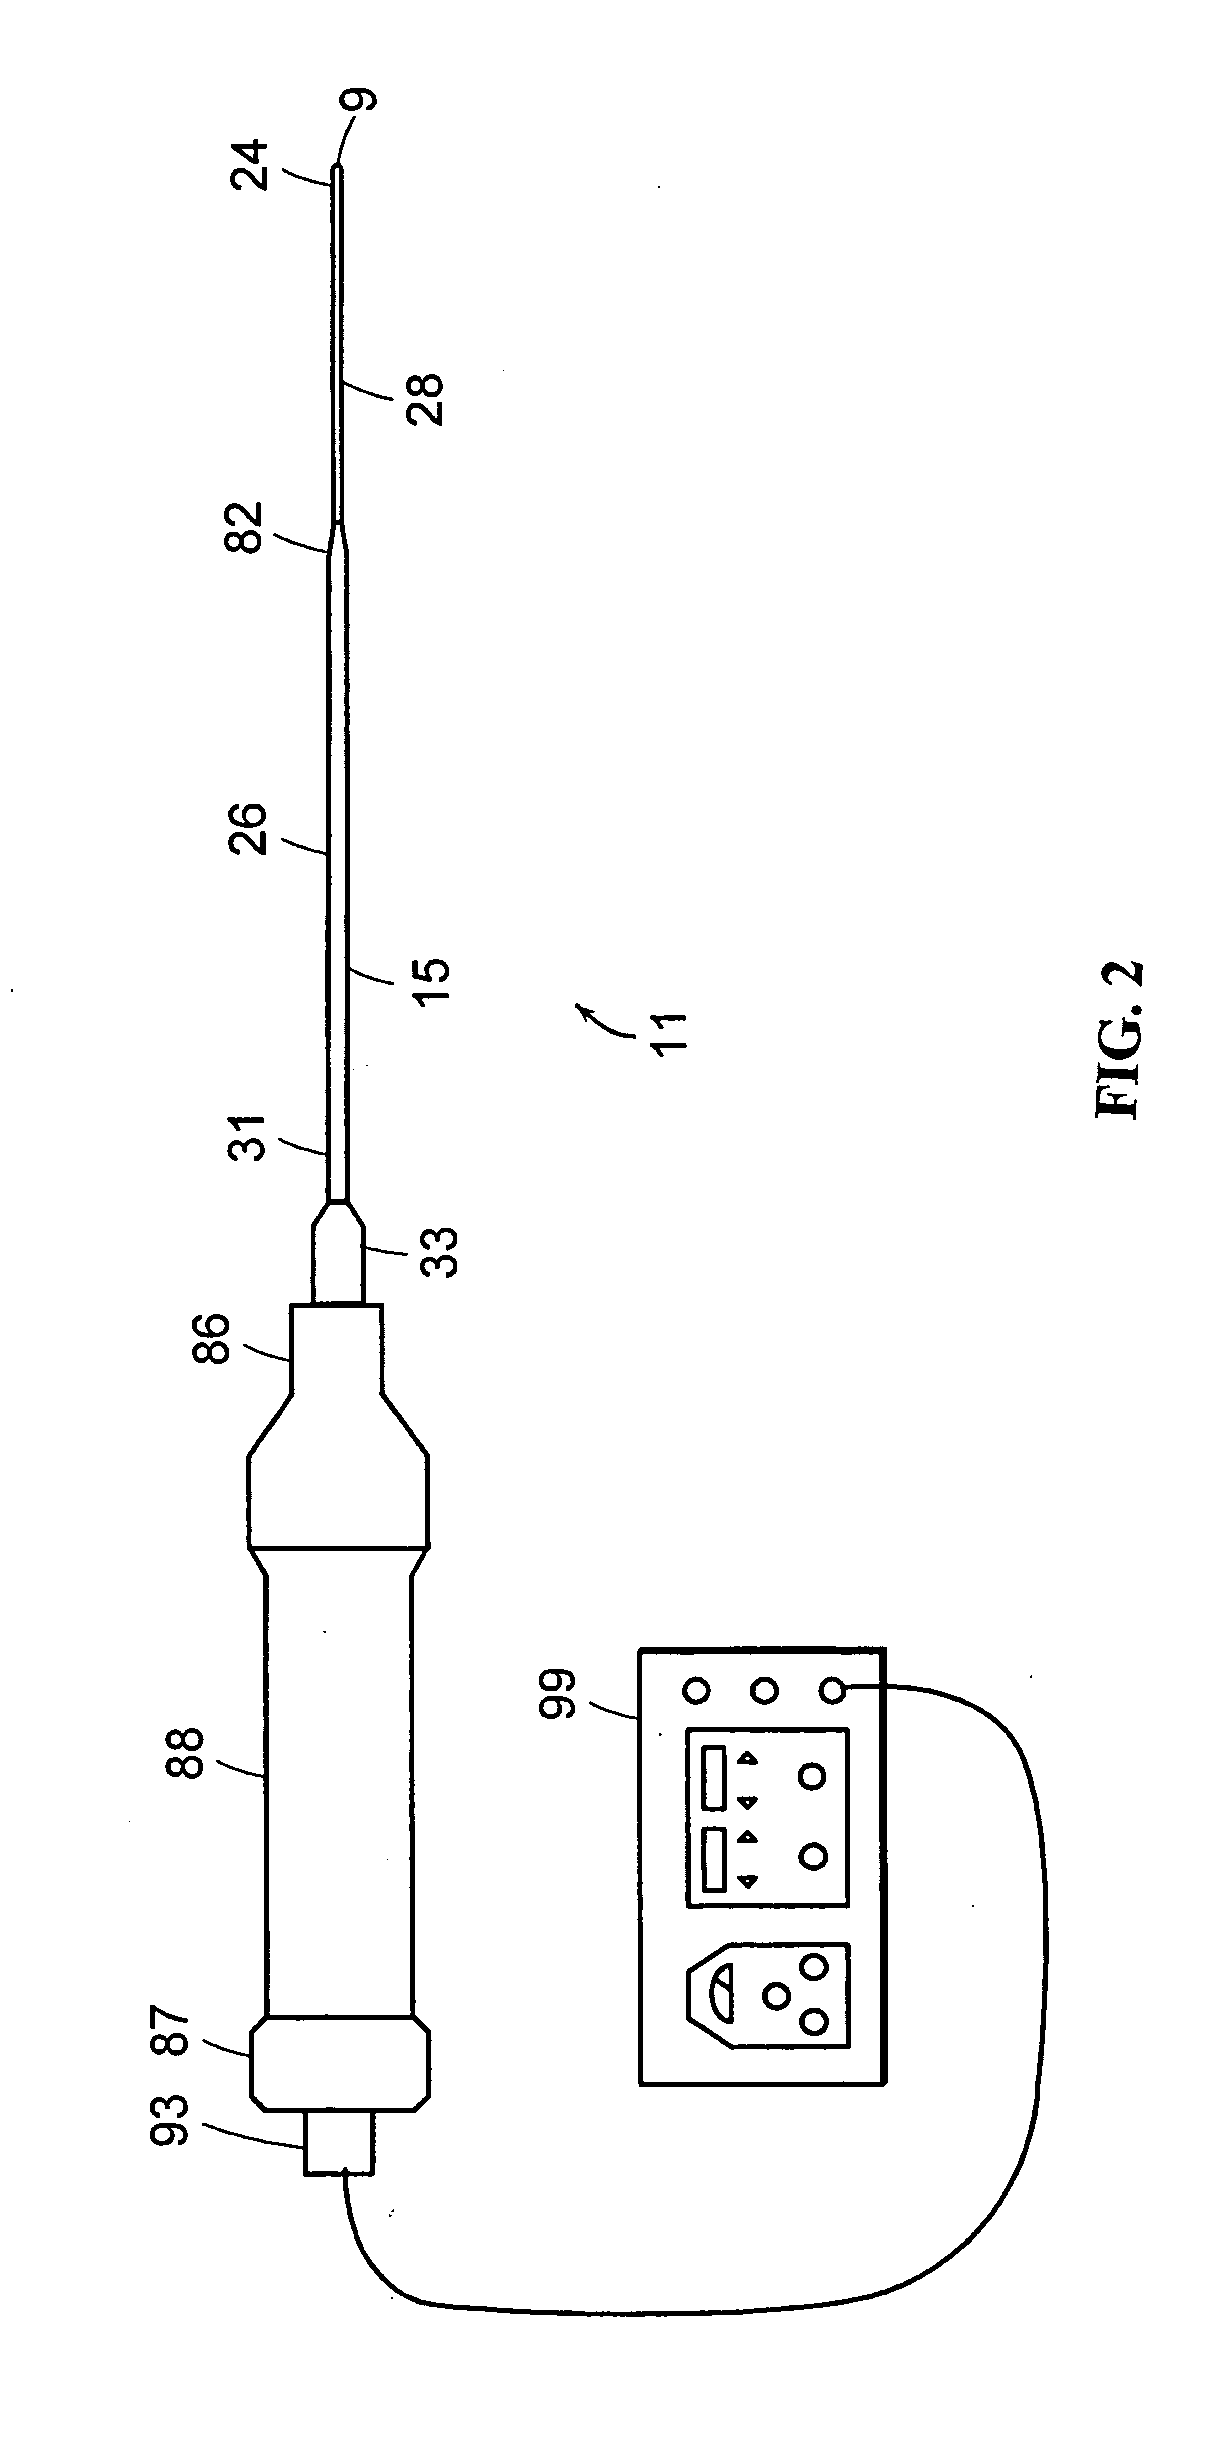 Apparatus and method for an ultrasonic medical device to treat chronic total occlusions